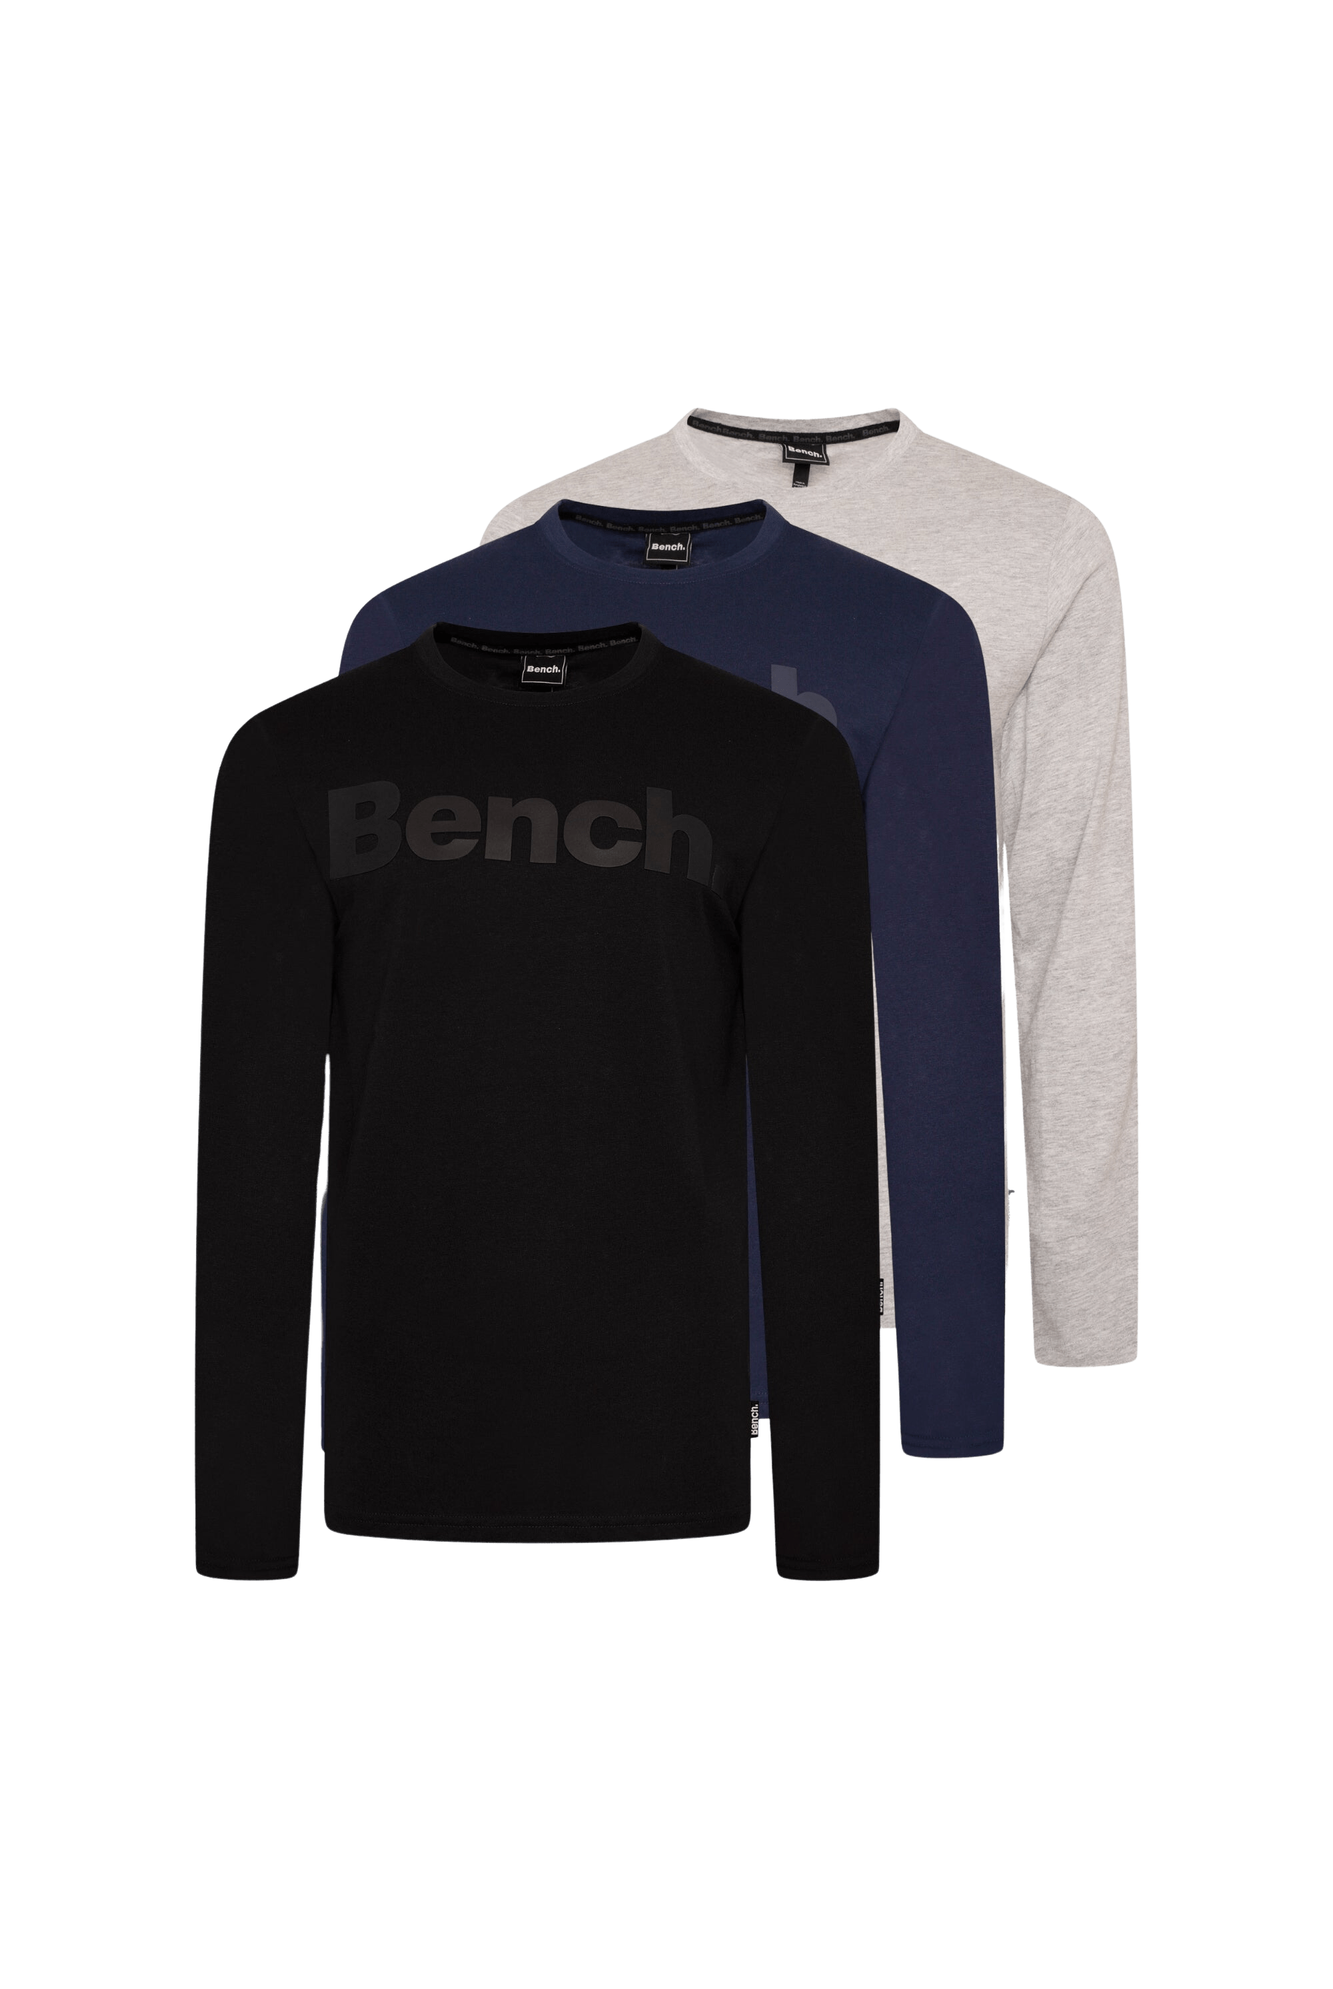 Shop Mens T-Shirts & Tops, Home of The Multipack, #LoveMyHood,   – Bench Clothing - Mens, Womens